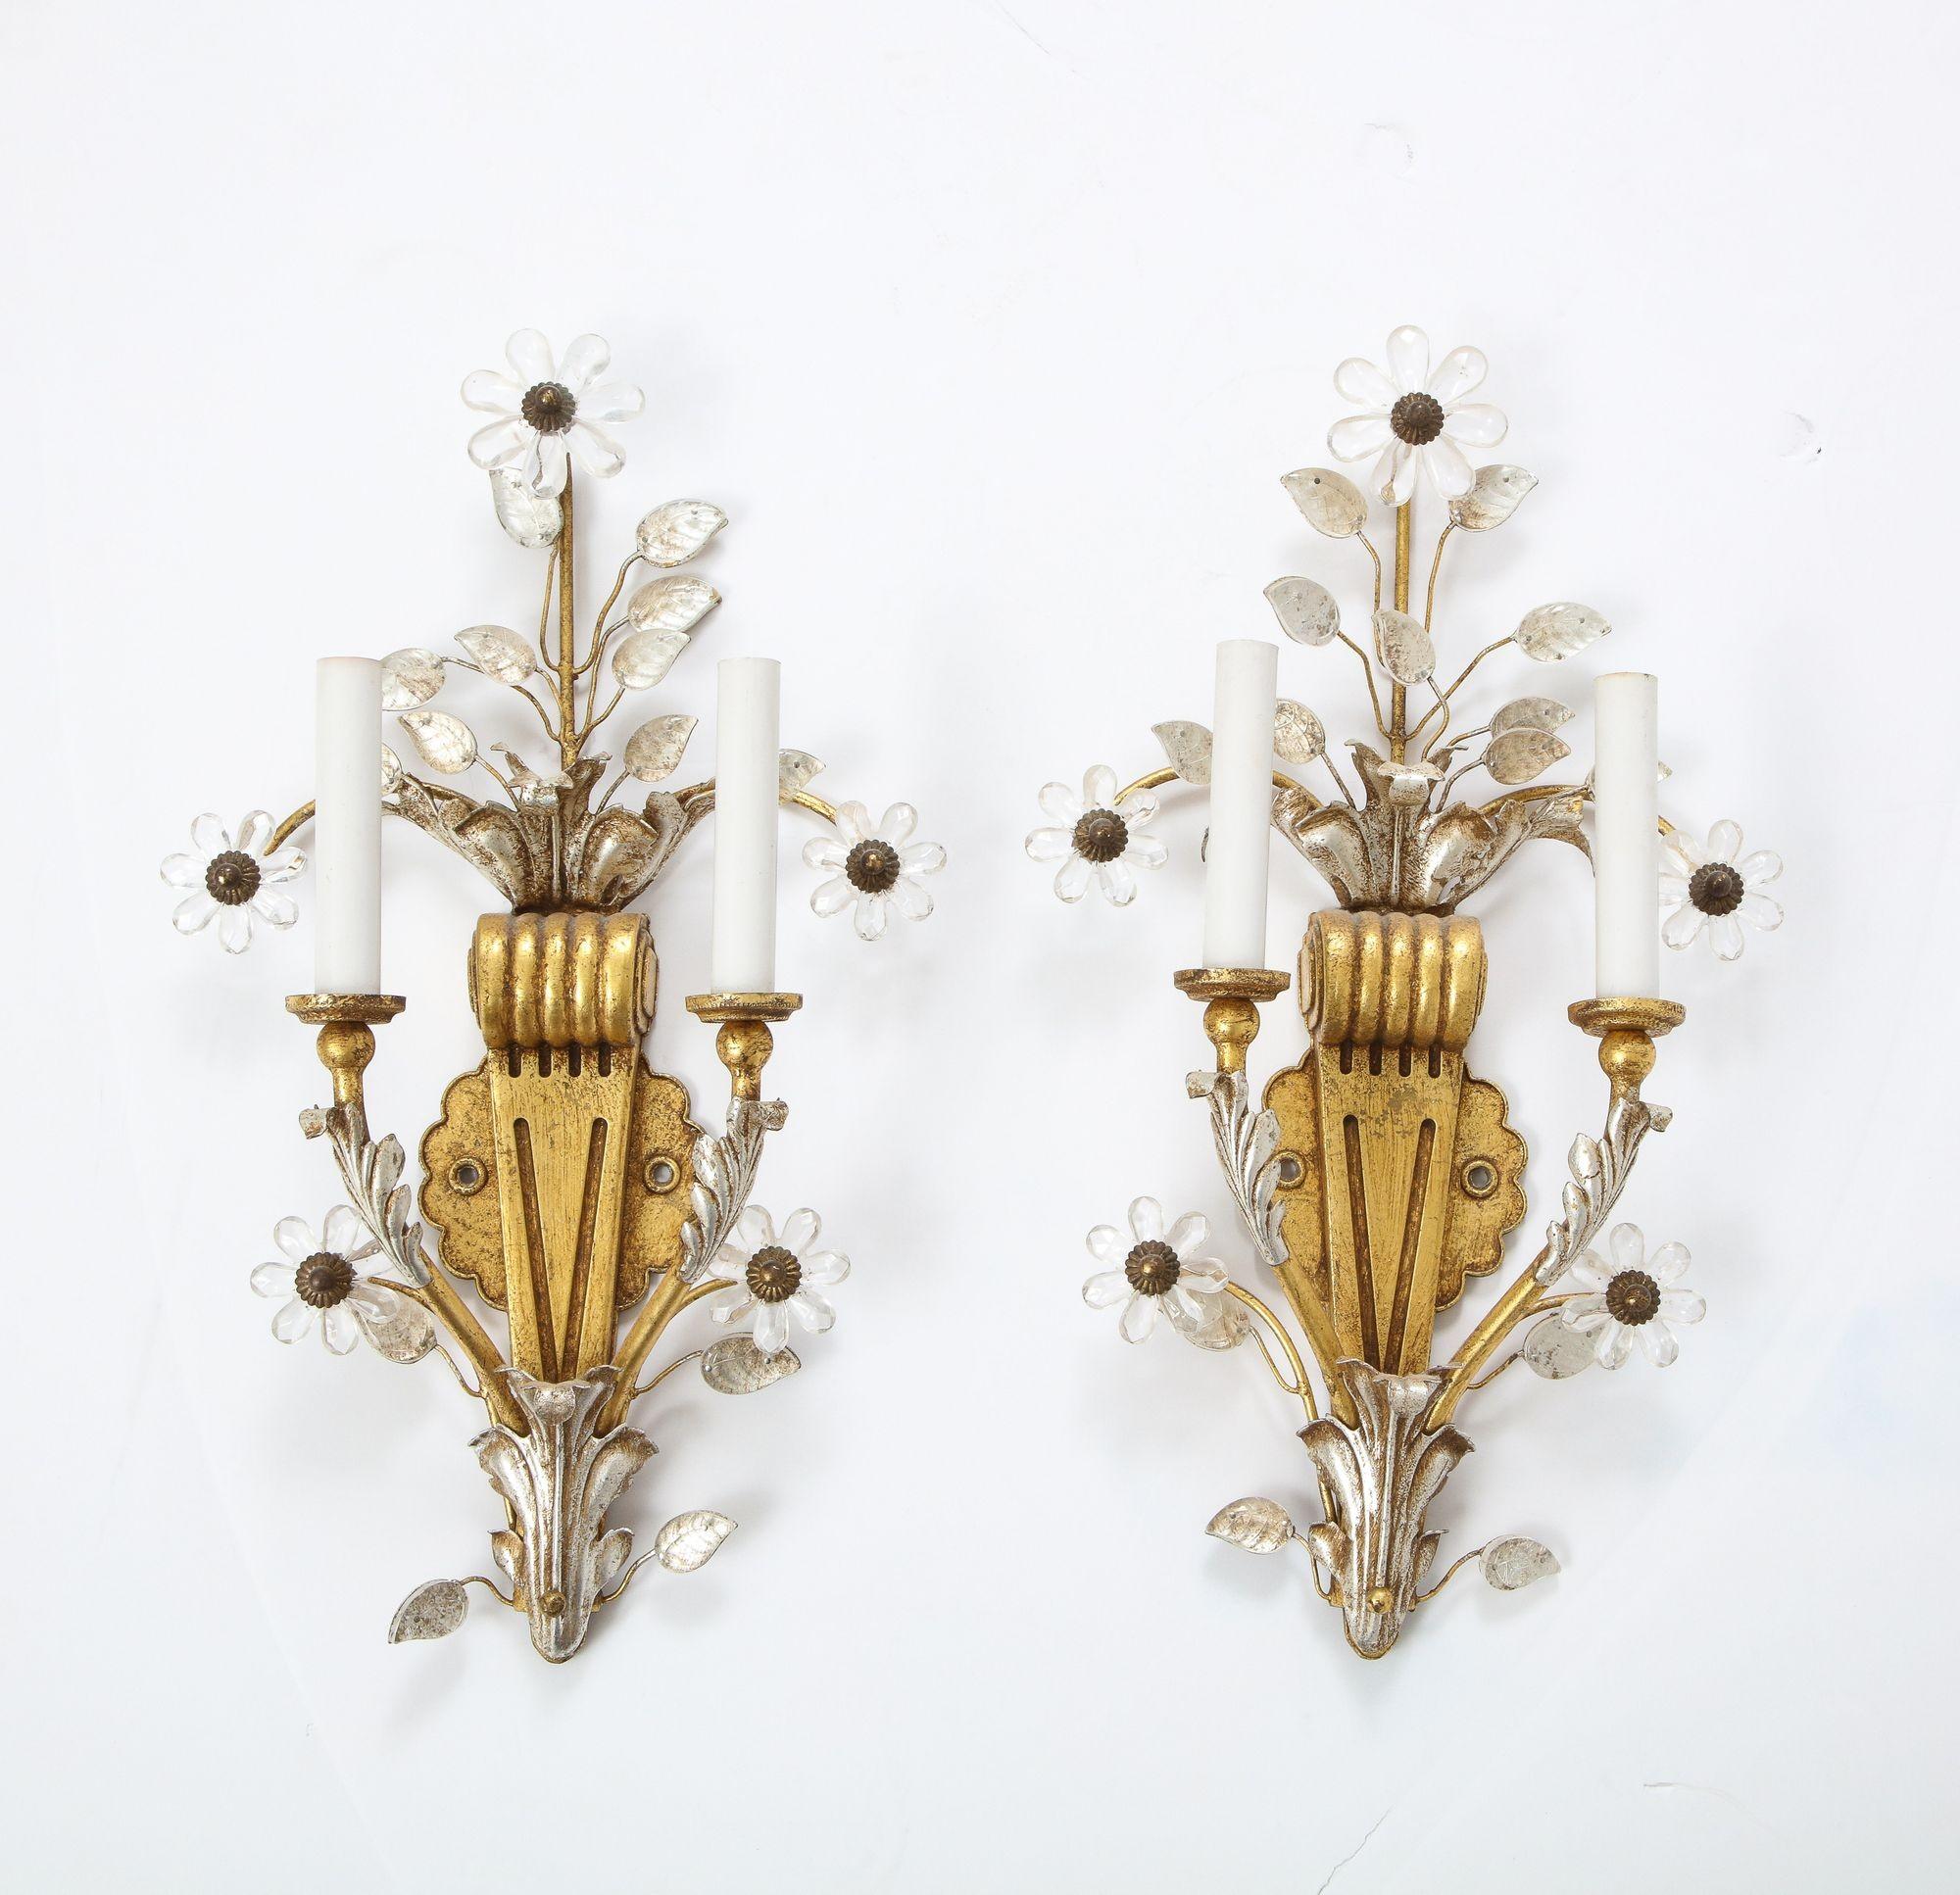 A beautiful pair of Gilt and Silvered Hollywood Regency Signed Banci Sconces with Rock Crystal Floral Motif.